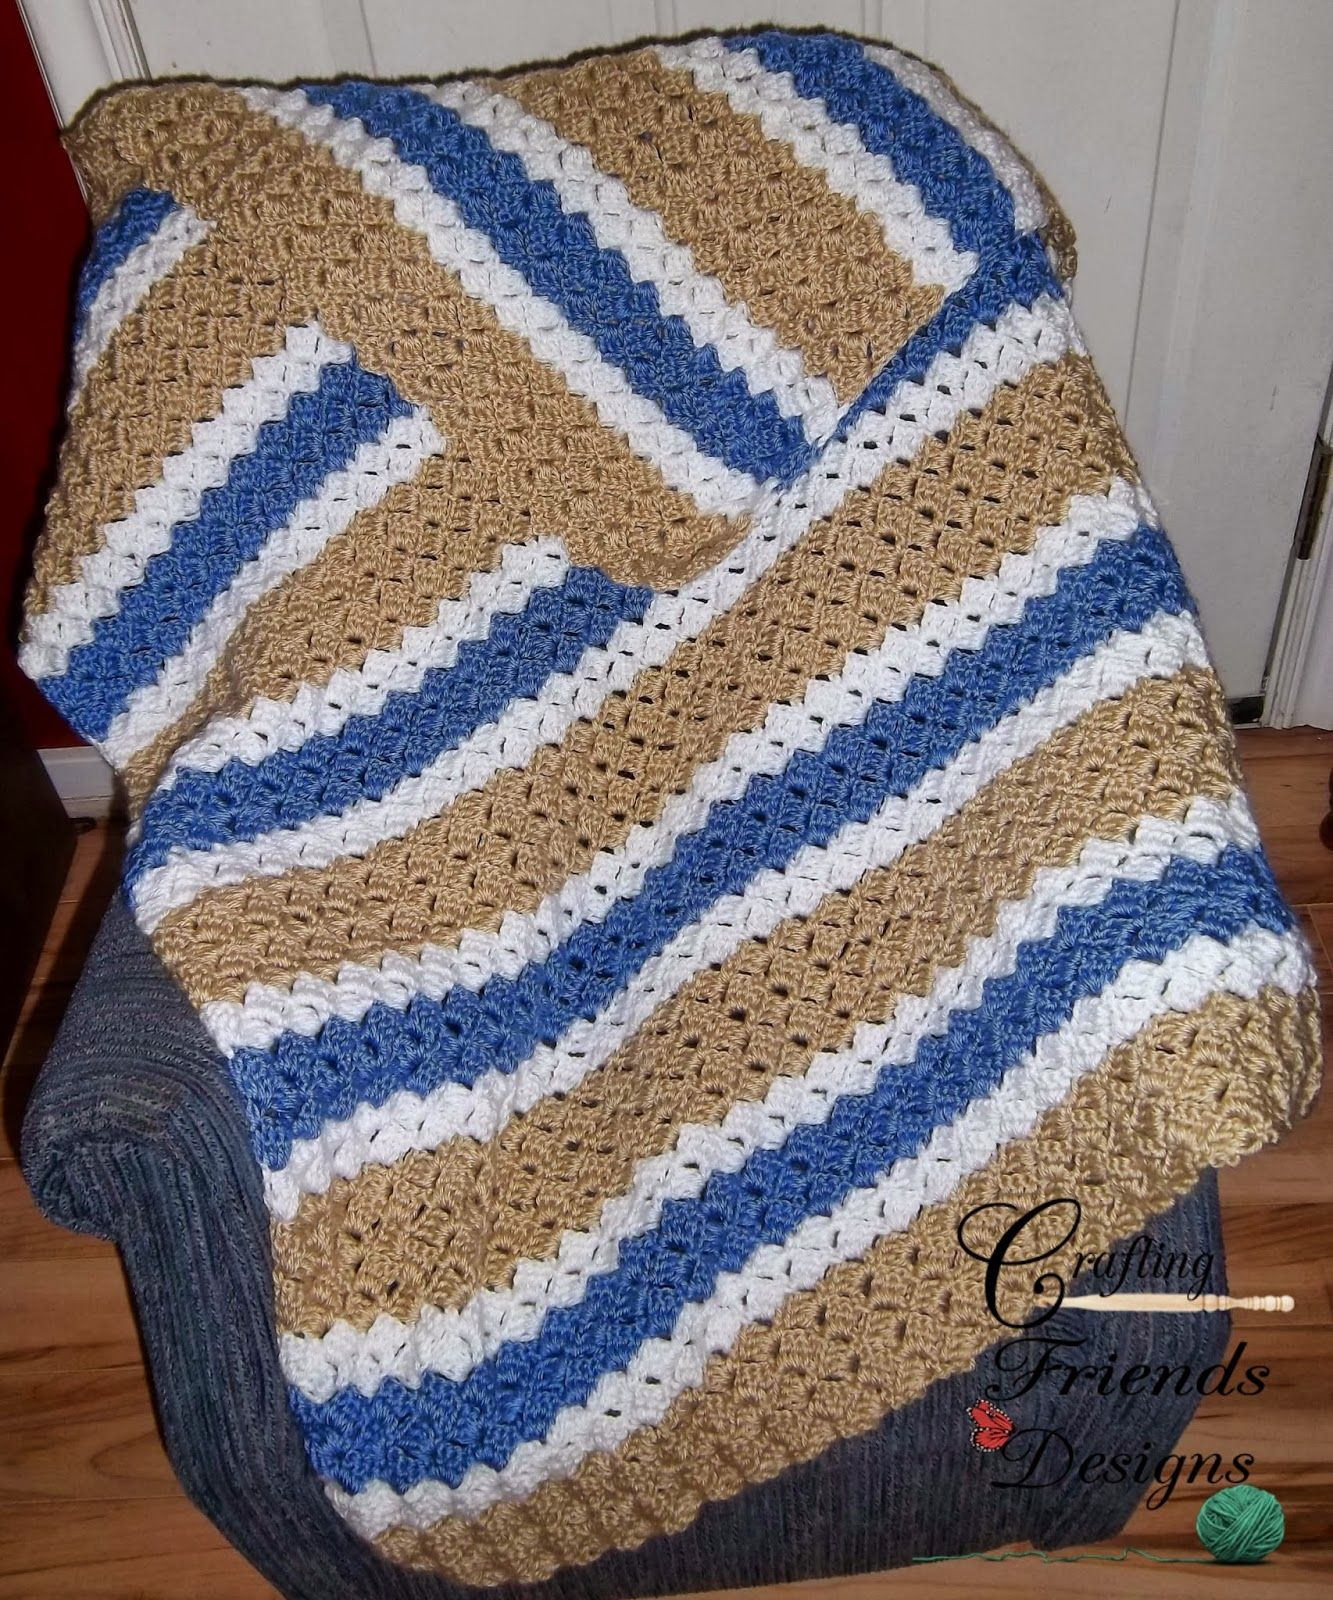 Brick Stitch Crochet Pattern Crafting Friends Designs Search Results For Brick Stitch Afghan